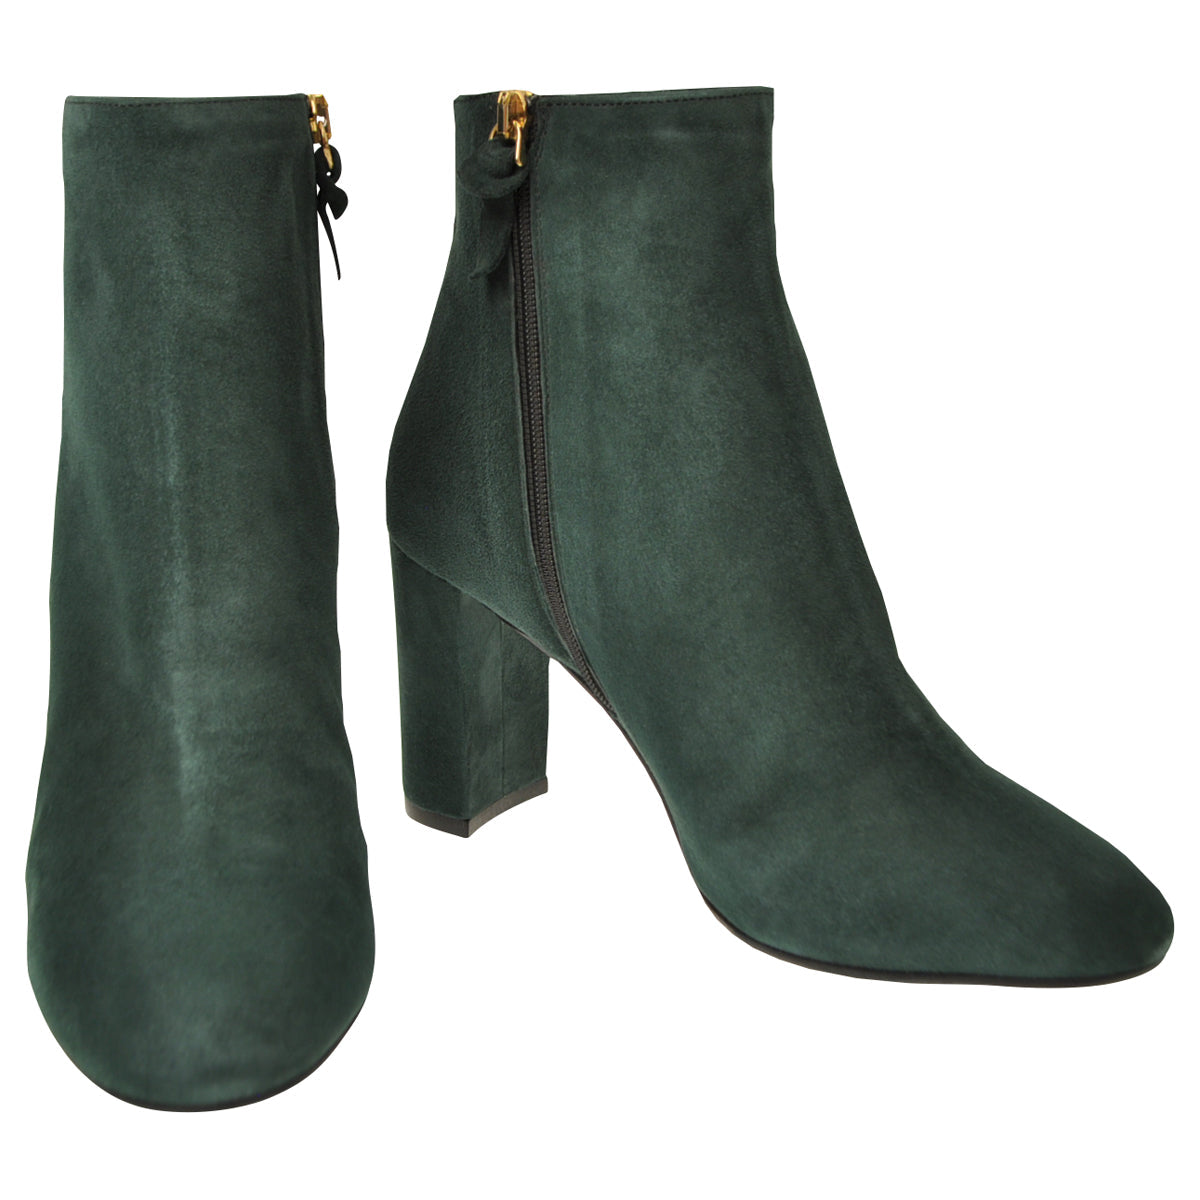 Green suede ankle boots. 